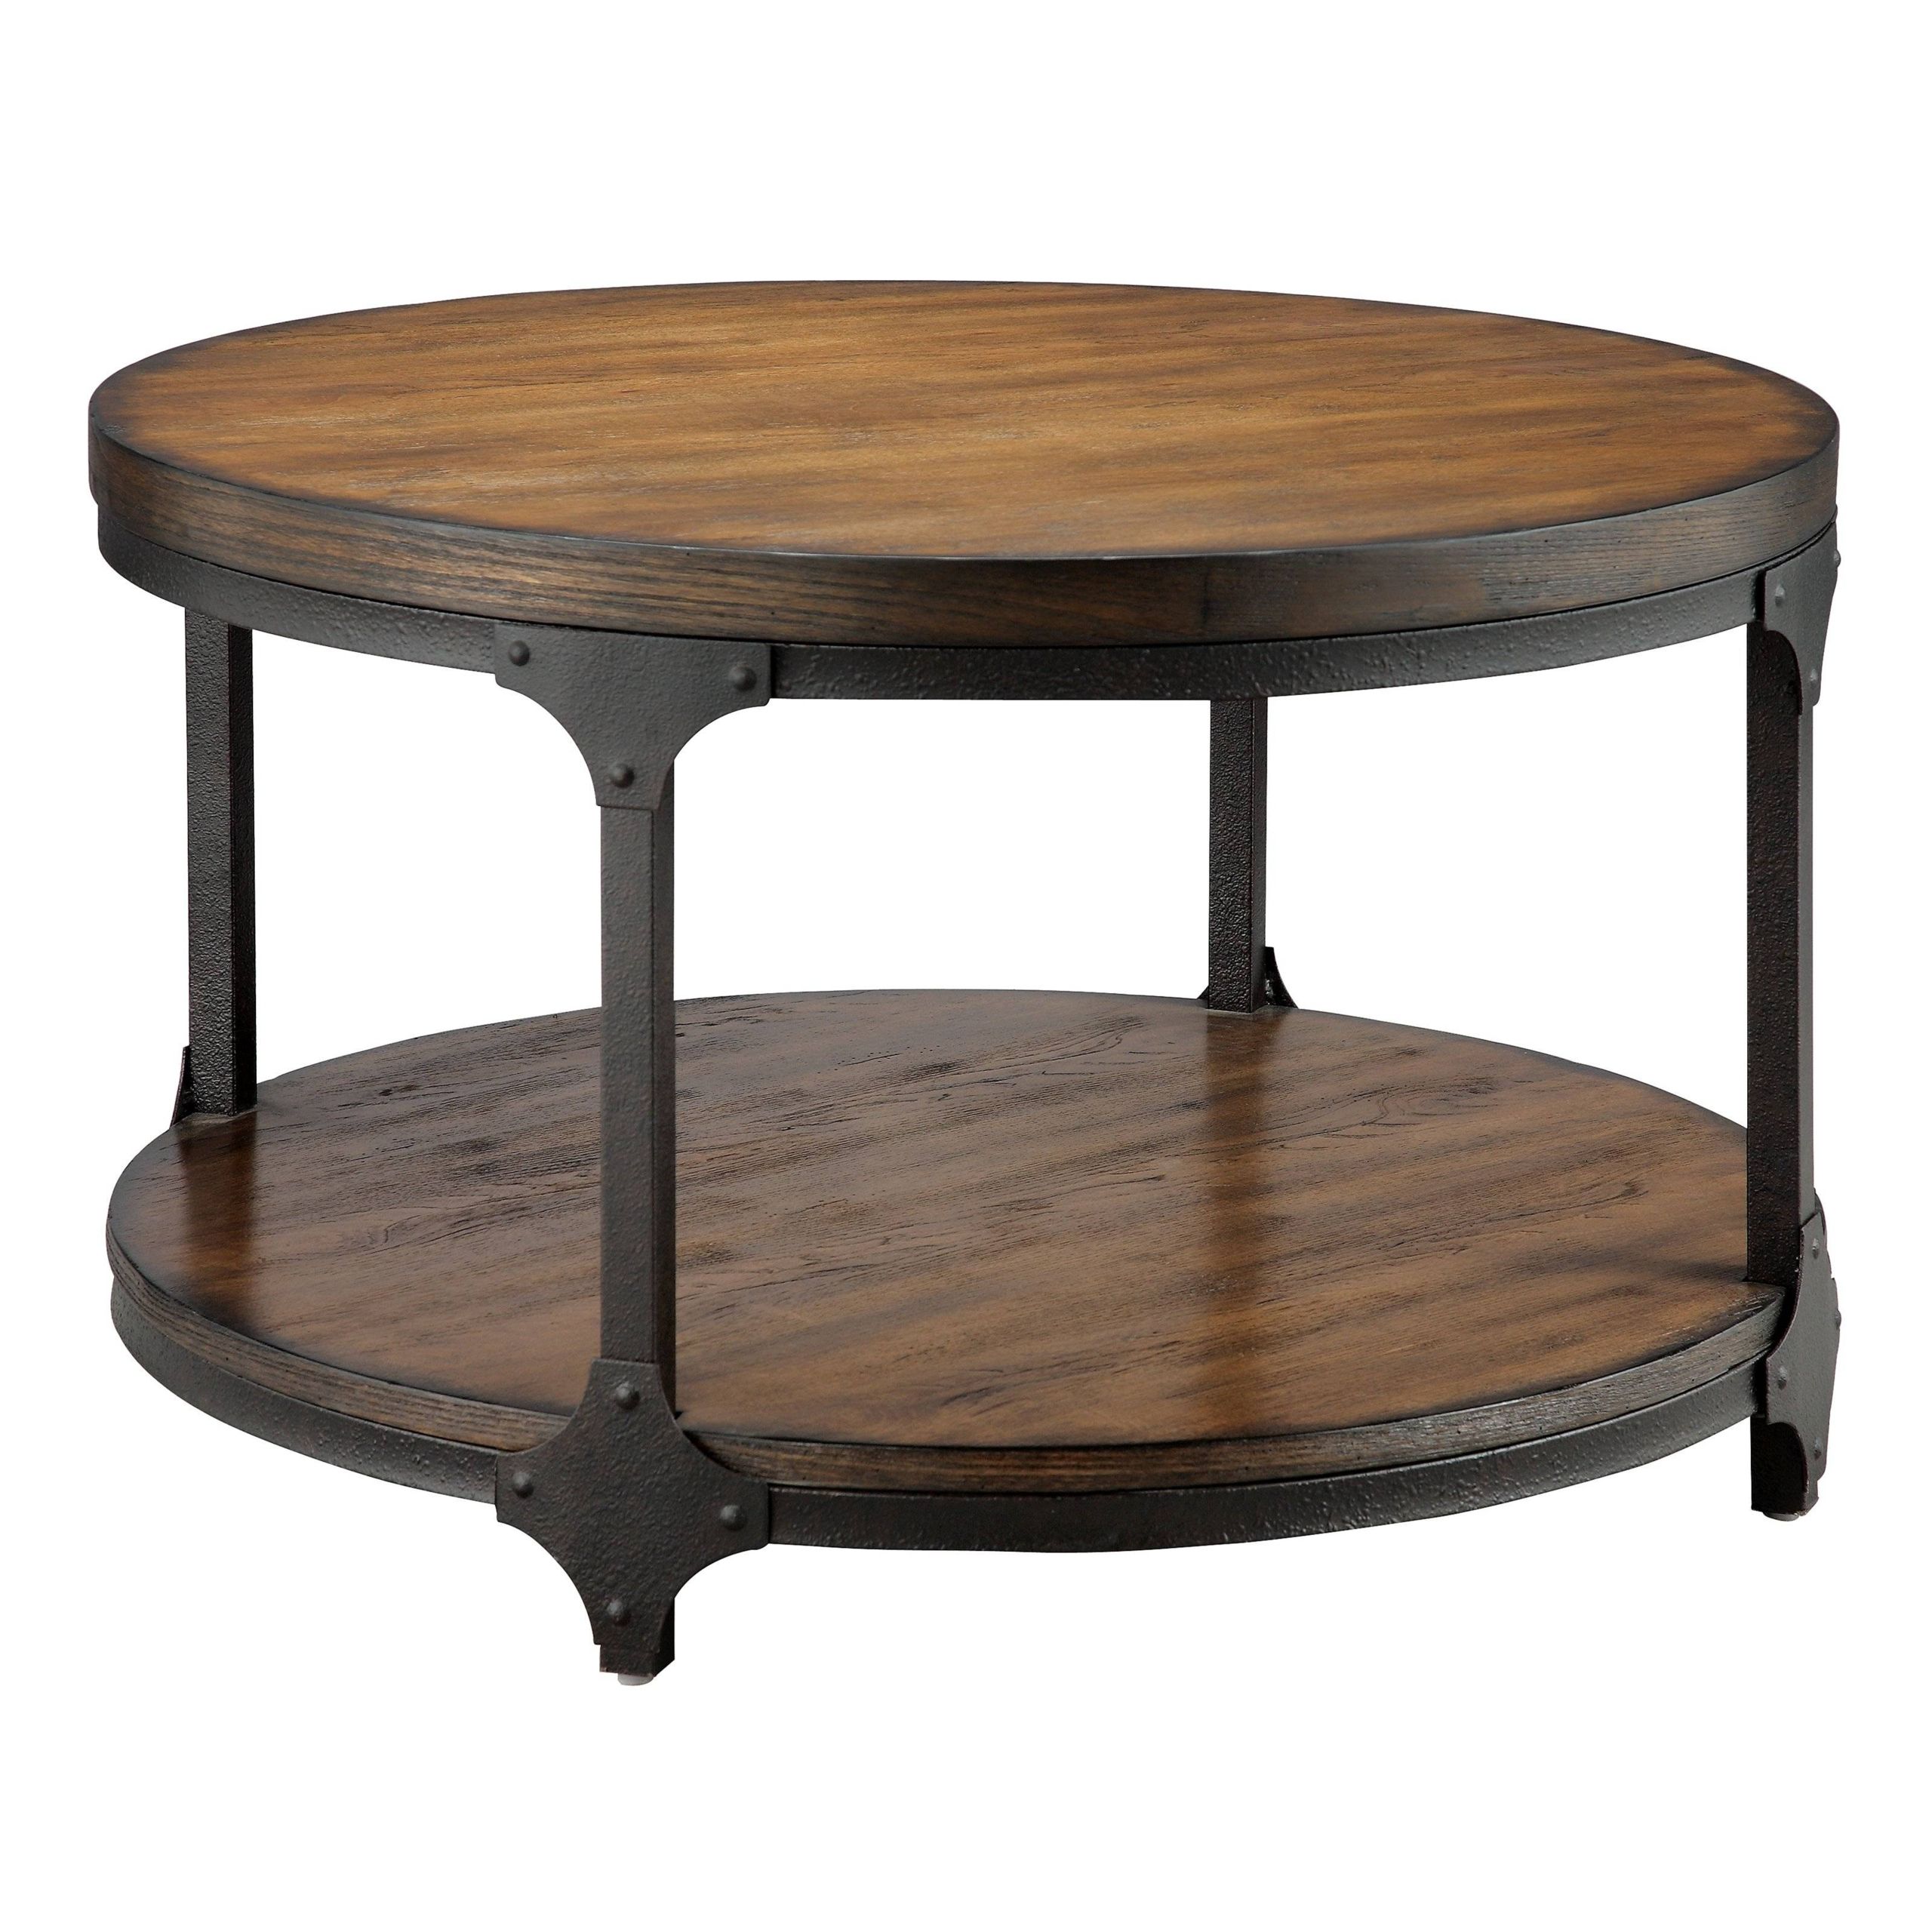 Round Industrial Coffee Table – Ideas On Foter Throughout Round Industrial Coffee Tables (View 10 of 15)